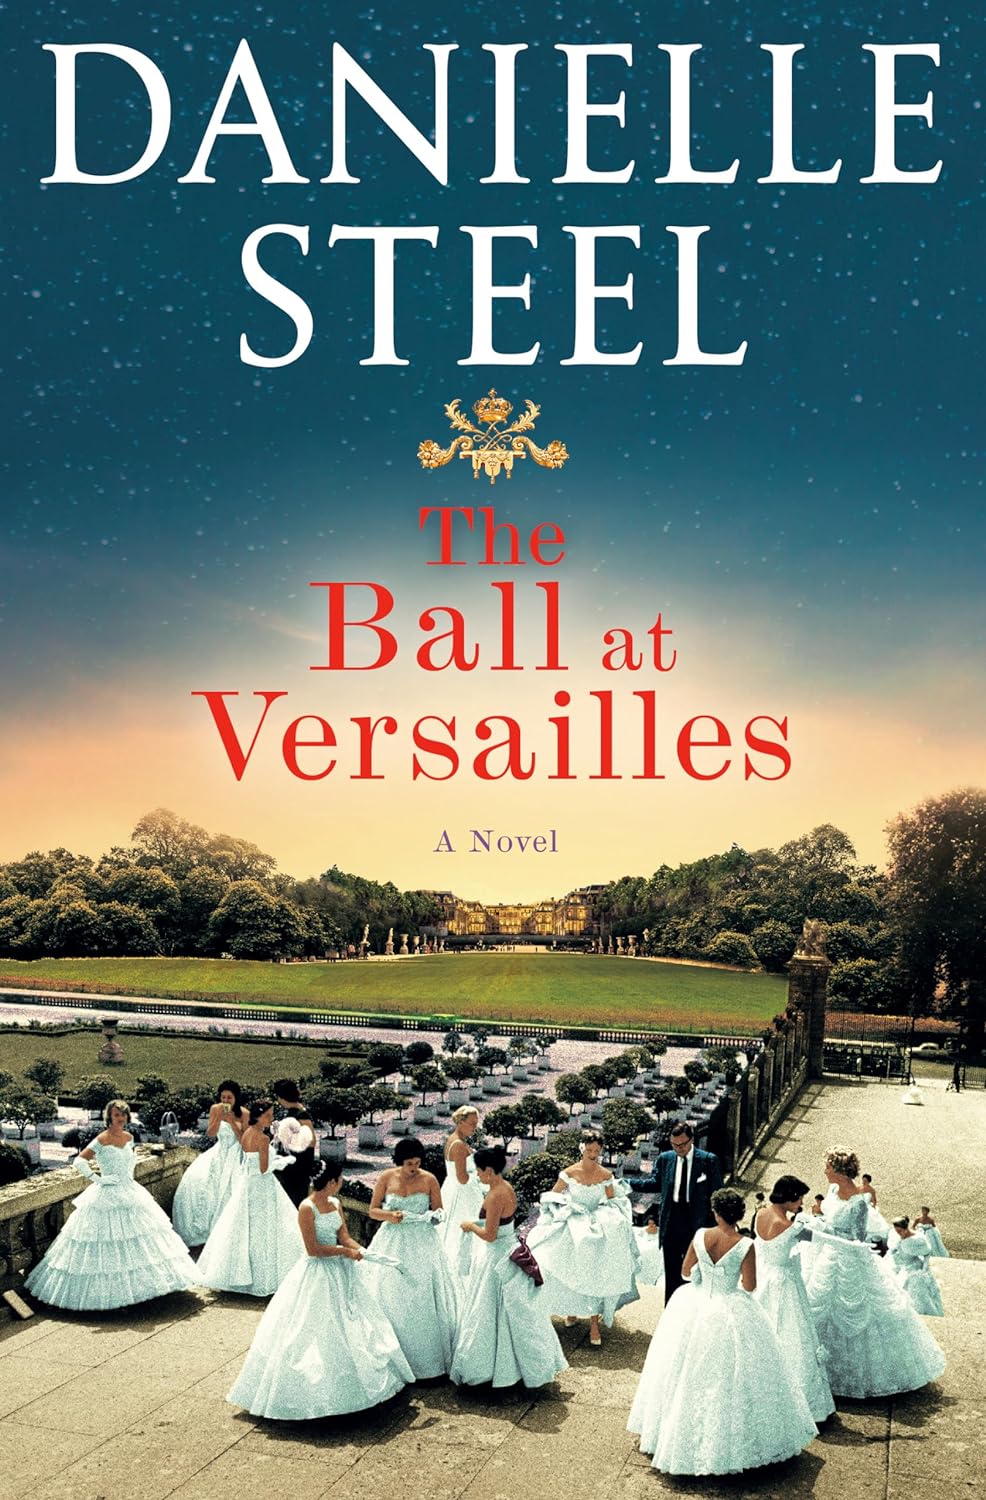 Image for "The Ball at Versailles"